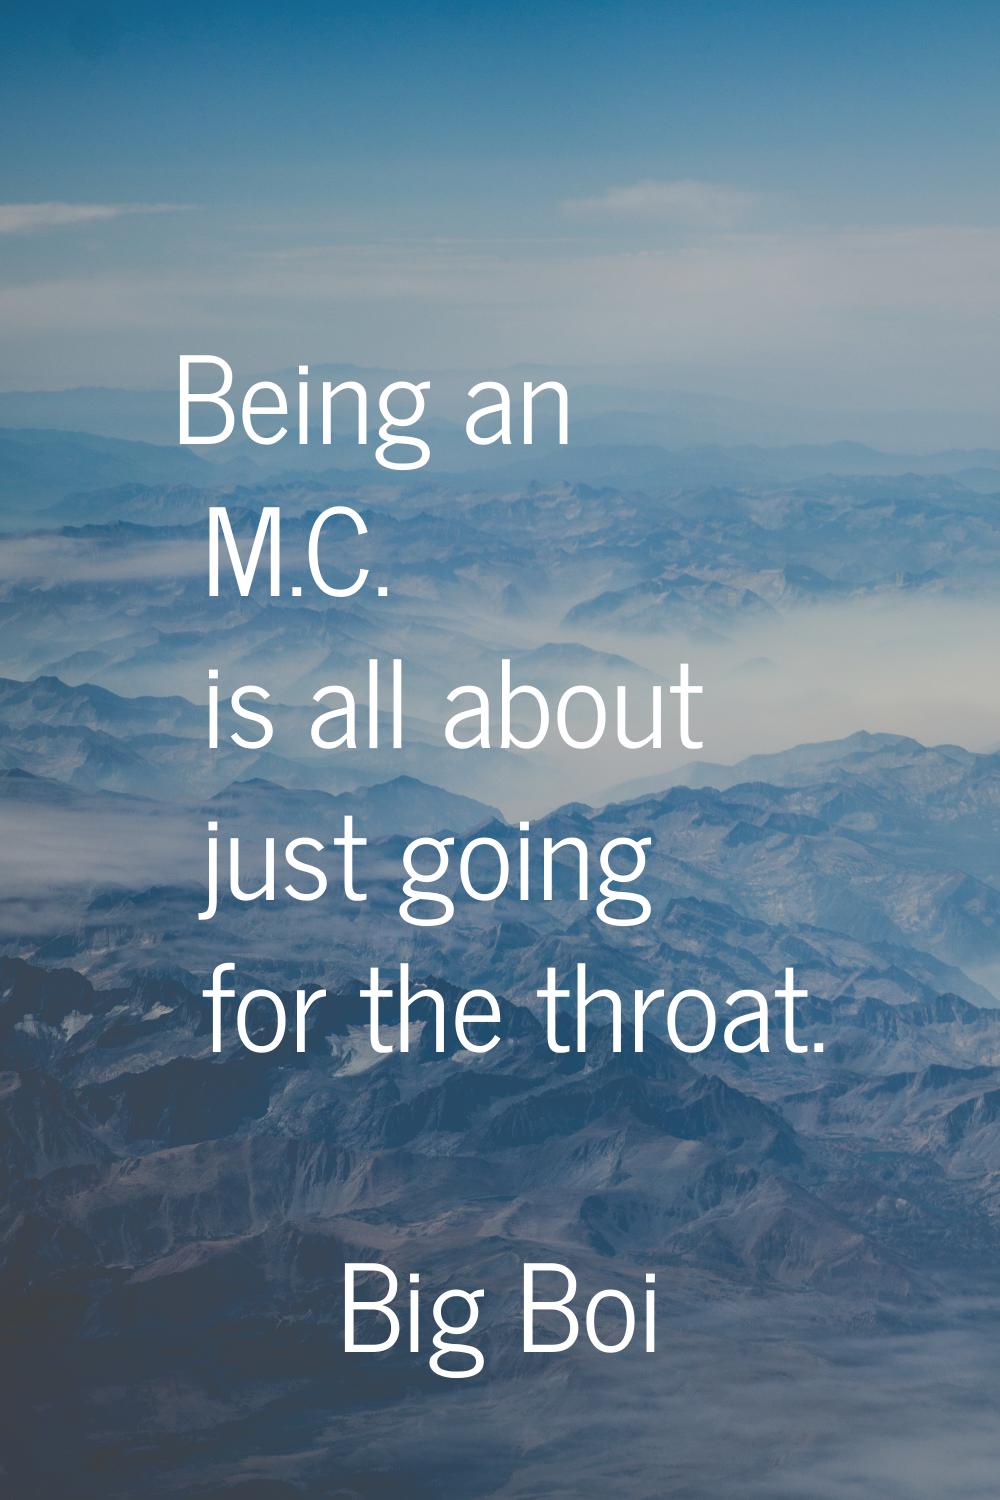 Being an M.C. is all about just going for the throat.